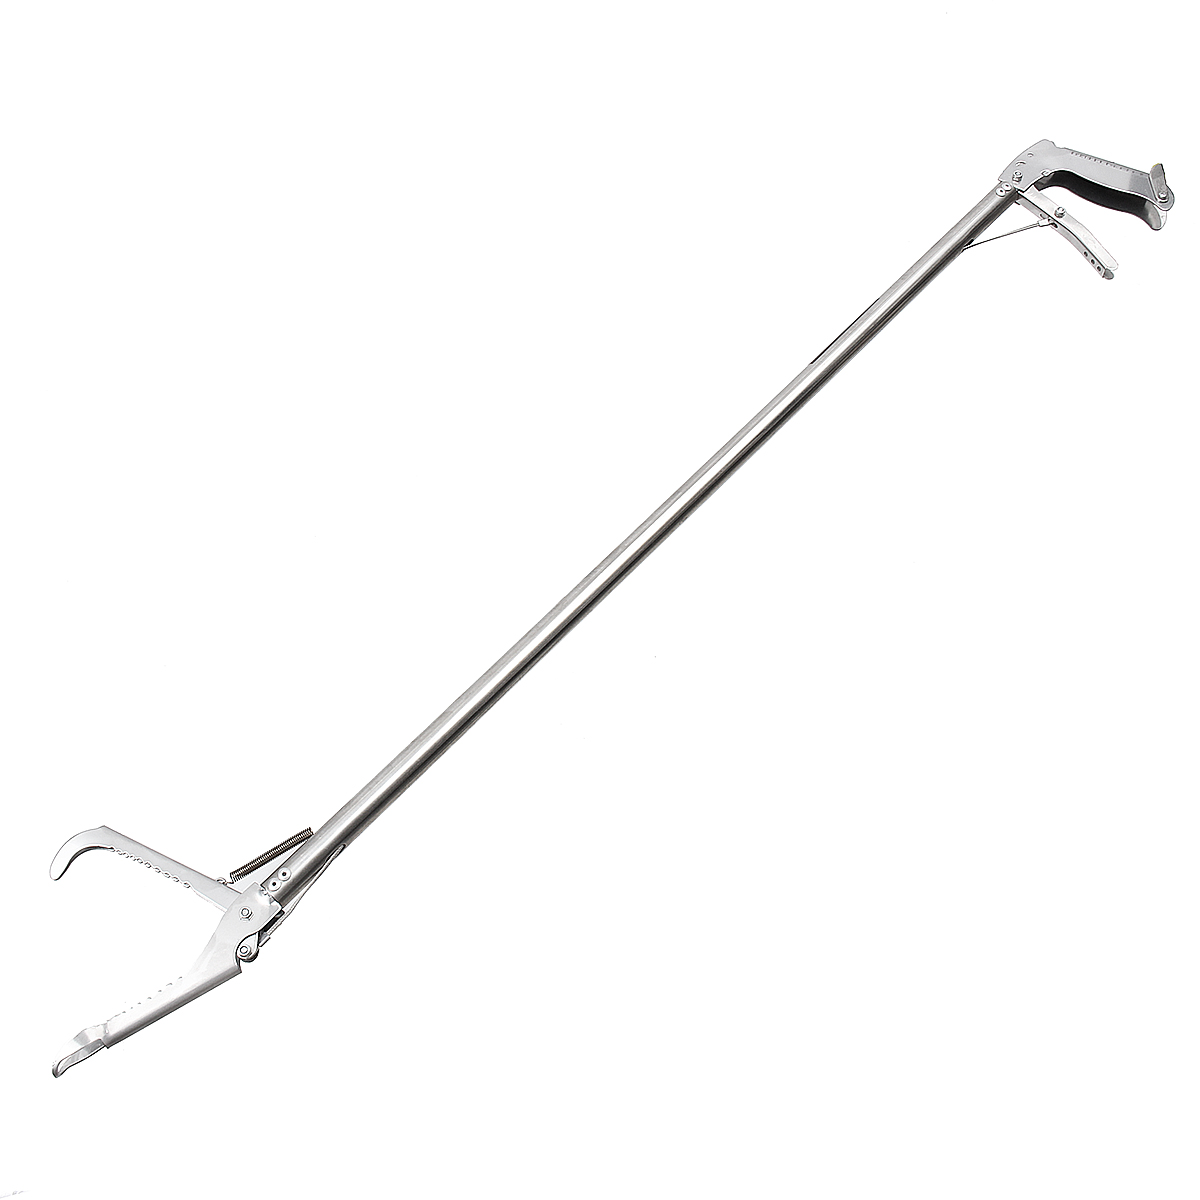 Snake-Stick-Grabber-Reacher-Catcher-Reptile-Tongs-Wide-Jaw-Handle-25FT-33FT-4FT-1558890